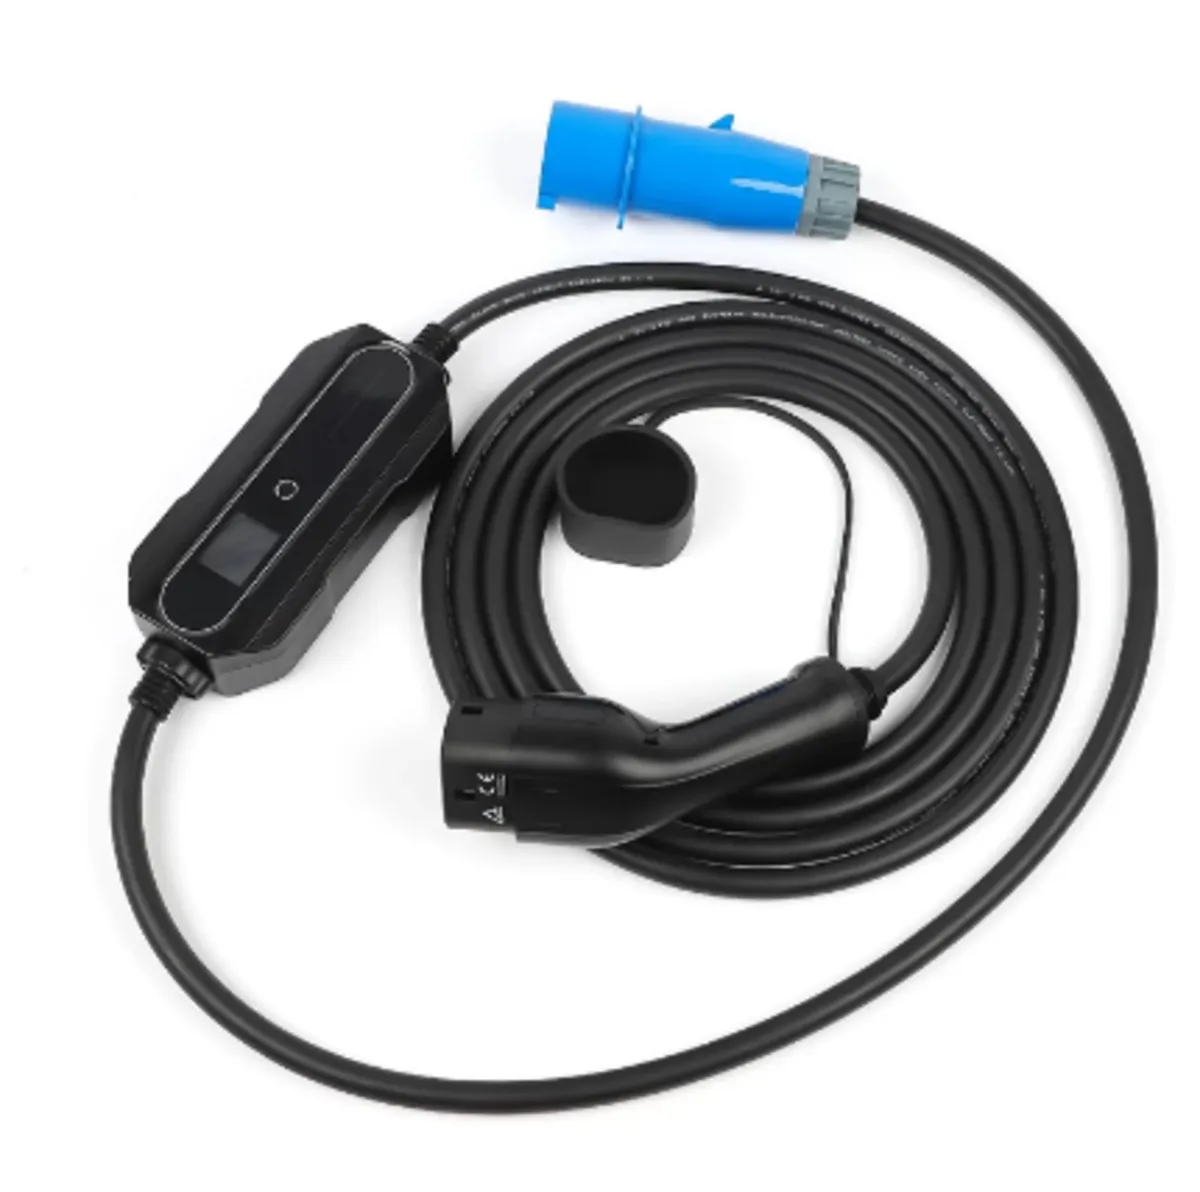 Electric Vehicle Charger 7KW Type 2, we deliver